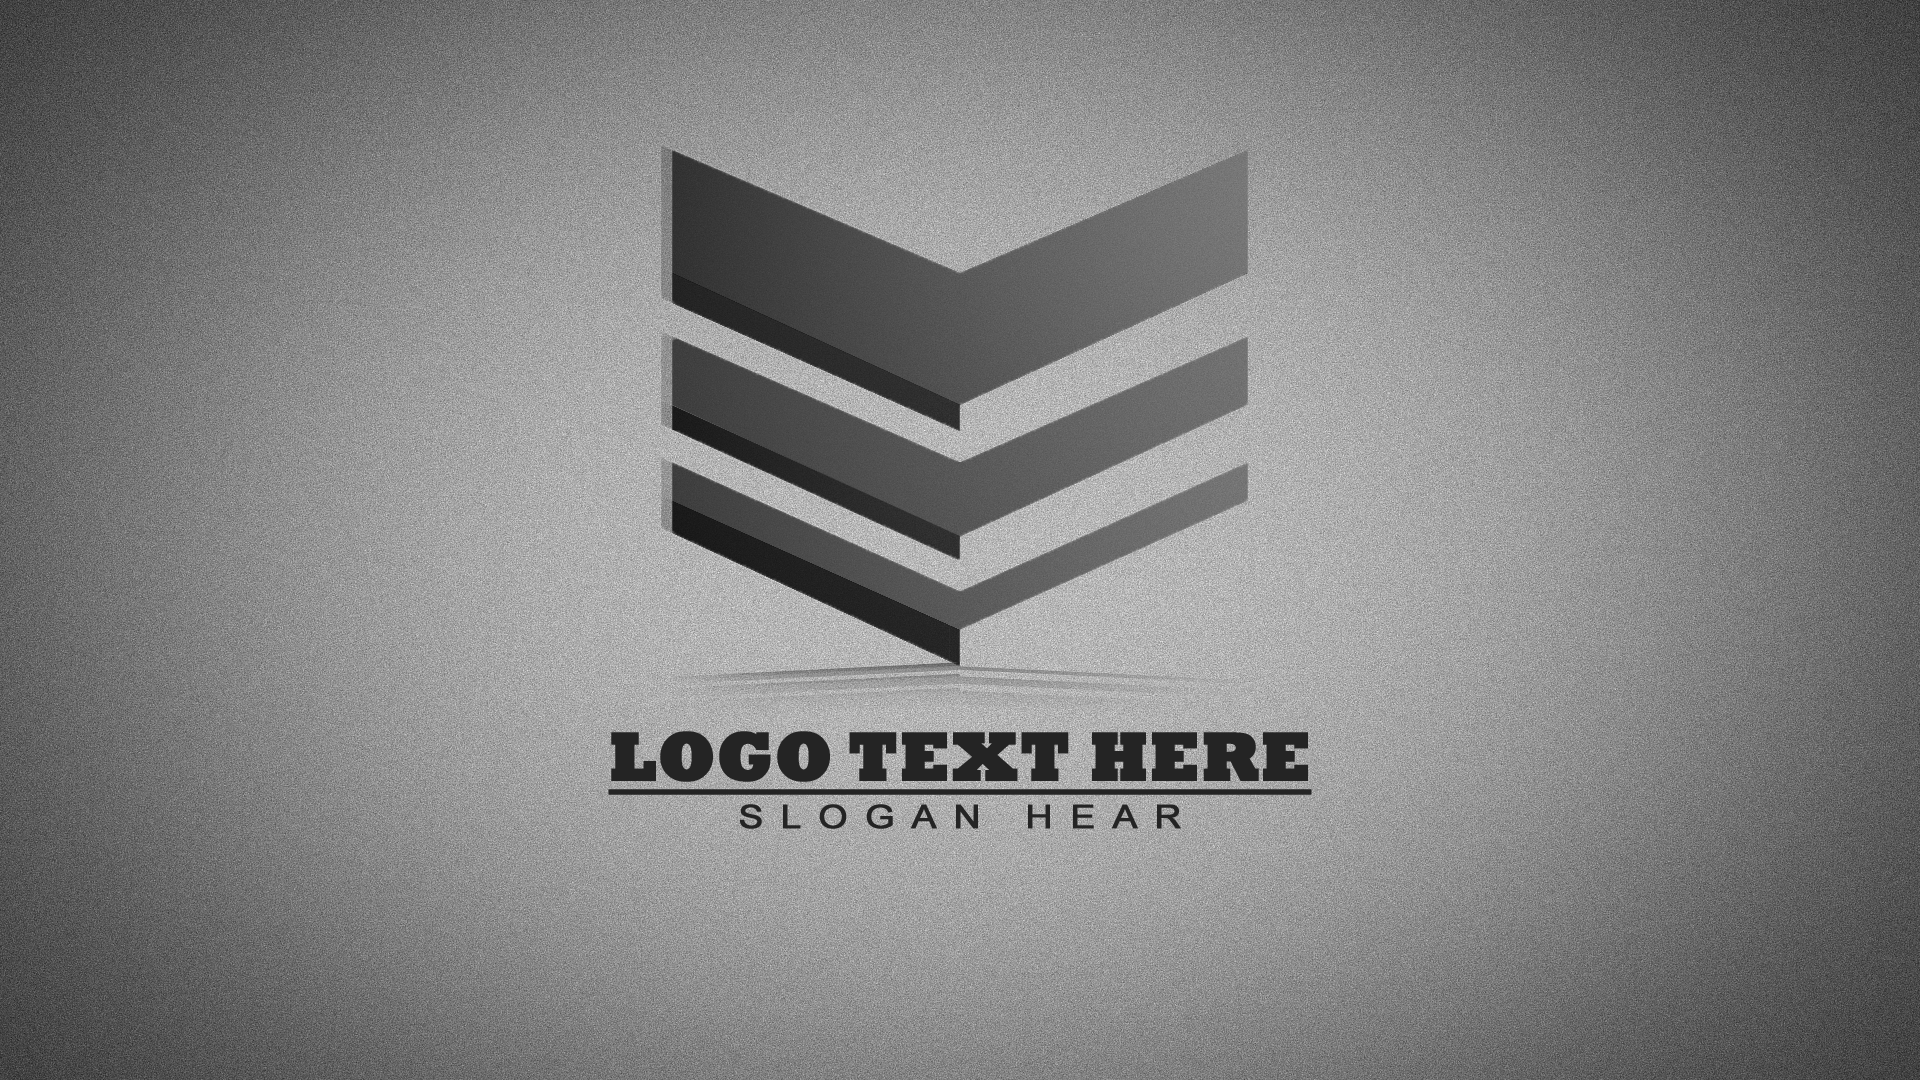 Great logo design for a business for $50 - SEOClerks